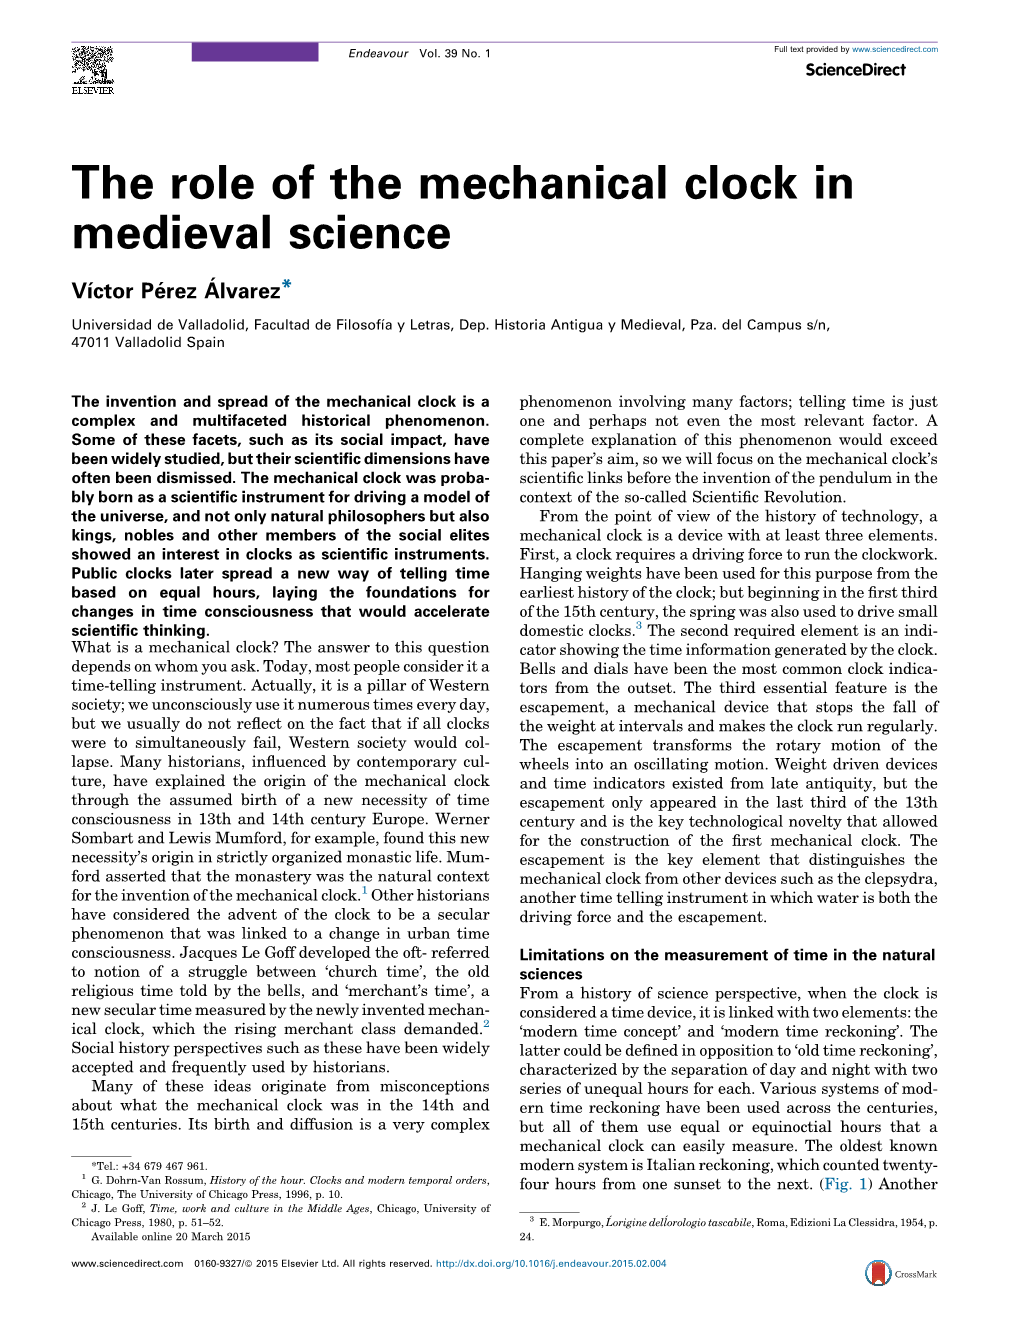 The Role of the Mechanical Clock in Medieval Science